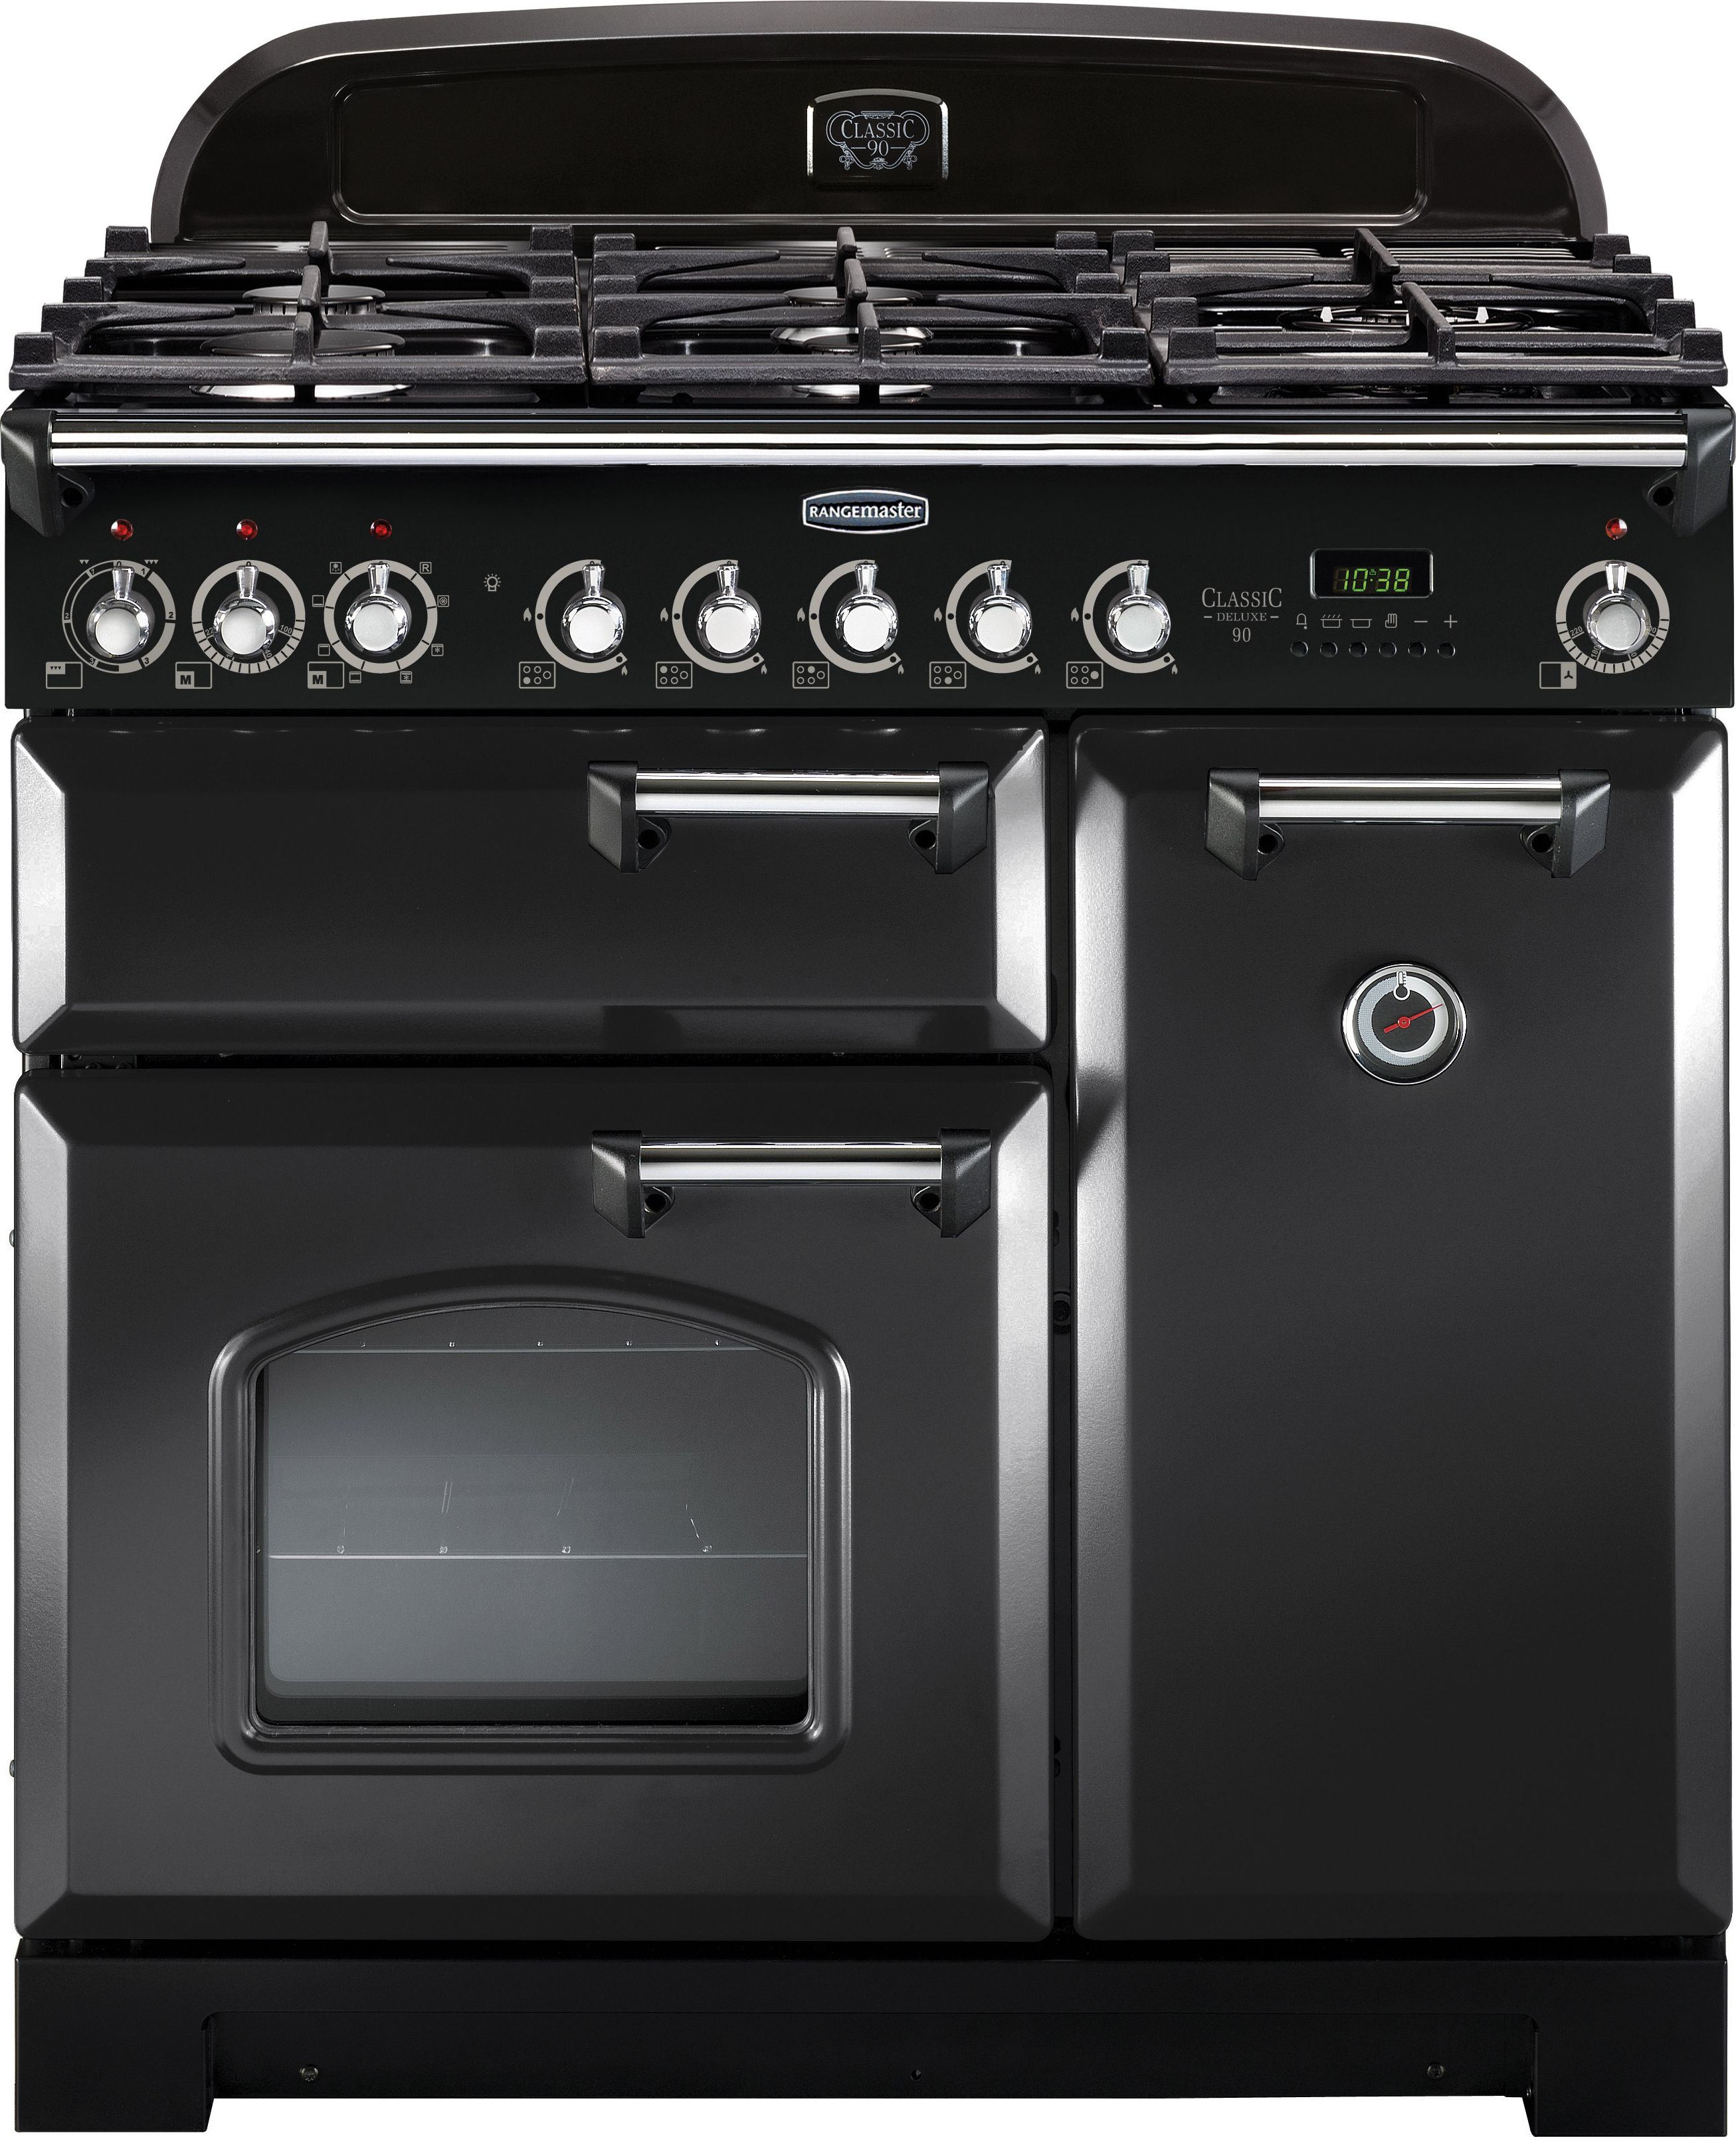 Rangemaster Classic Deluxe CDL90DFFCB/C 90cm Dual Fuel Range Cooker - Charcoal Black / Chrome - A/A Rated, Black